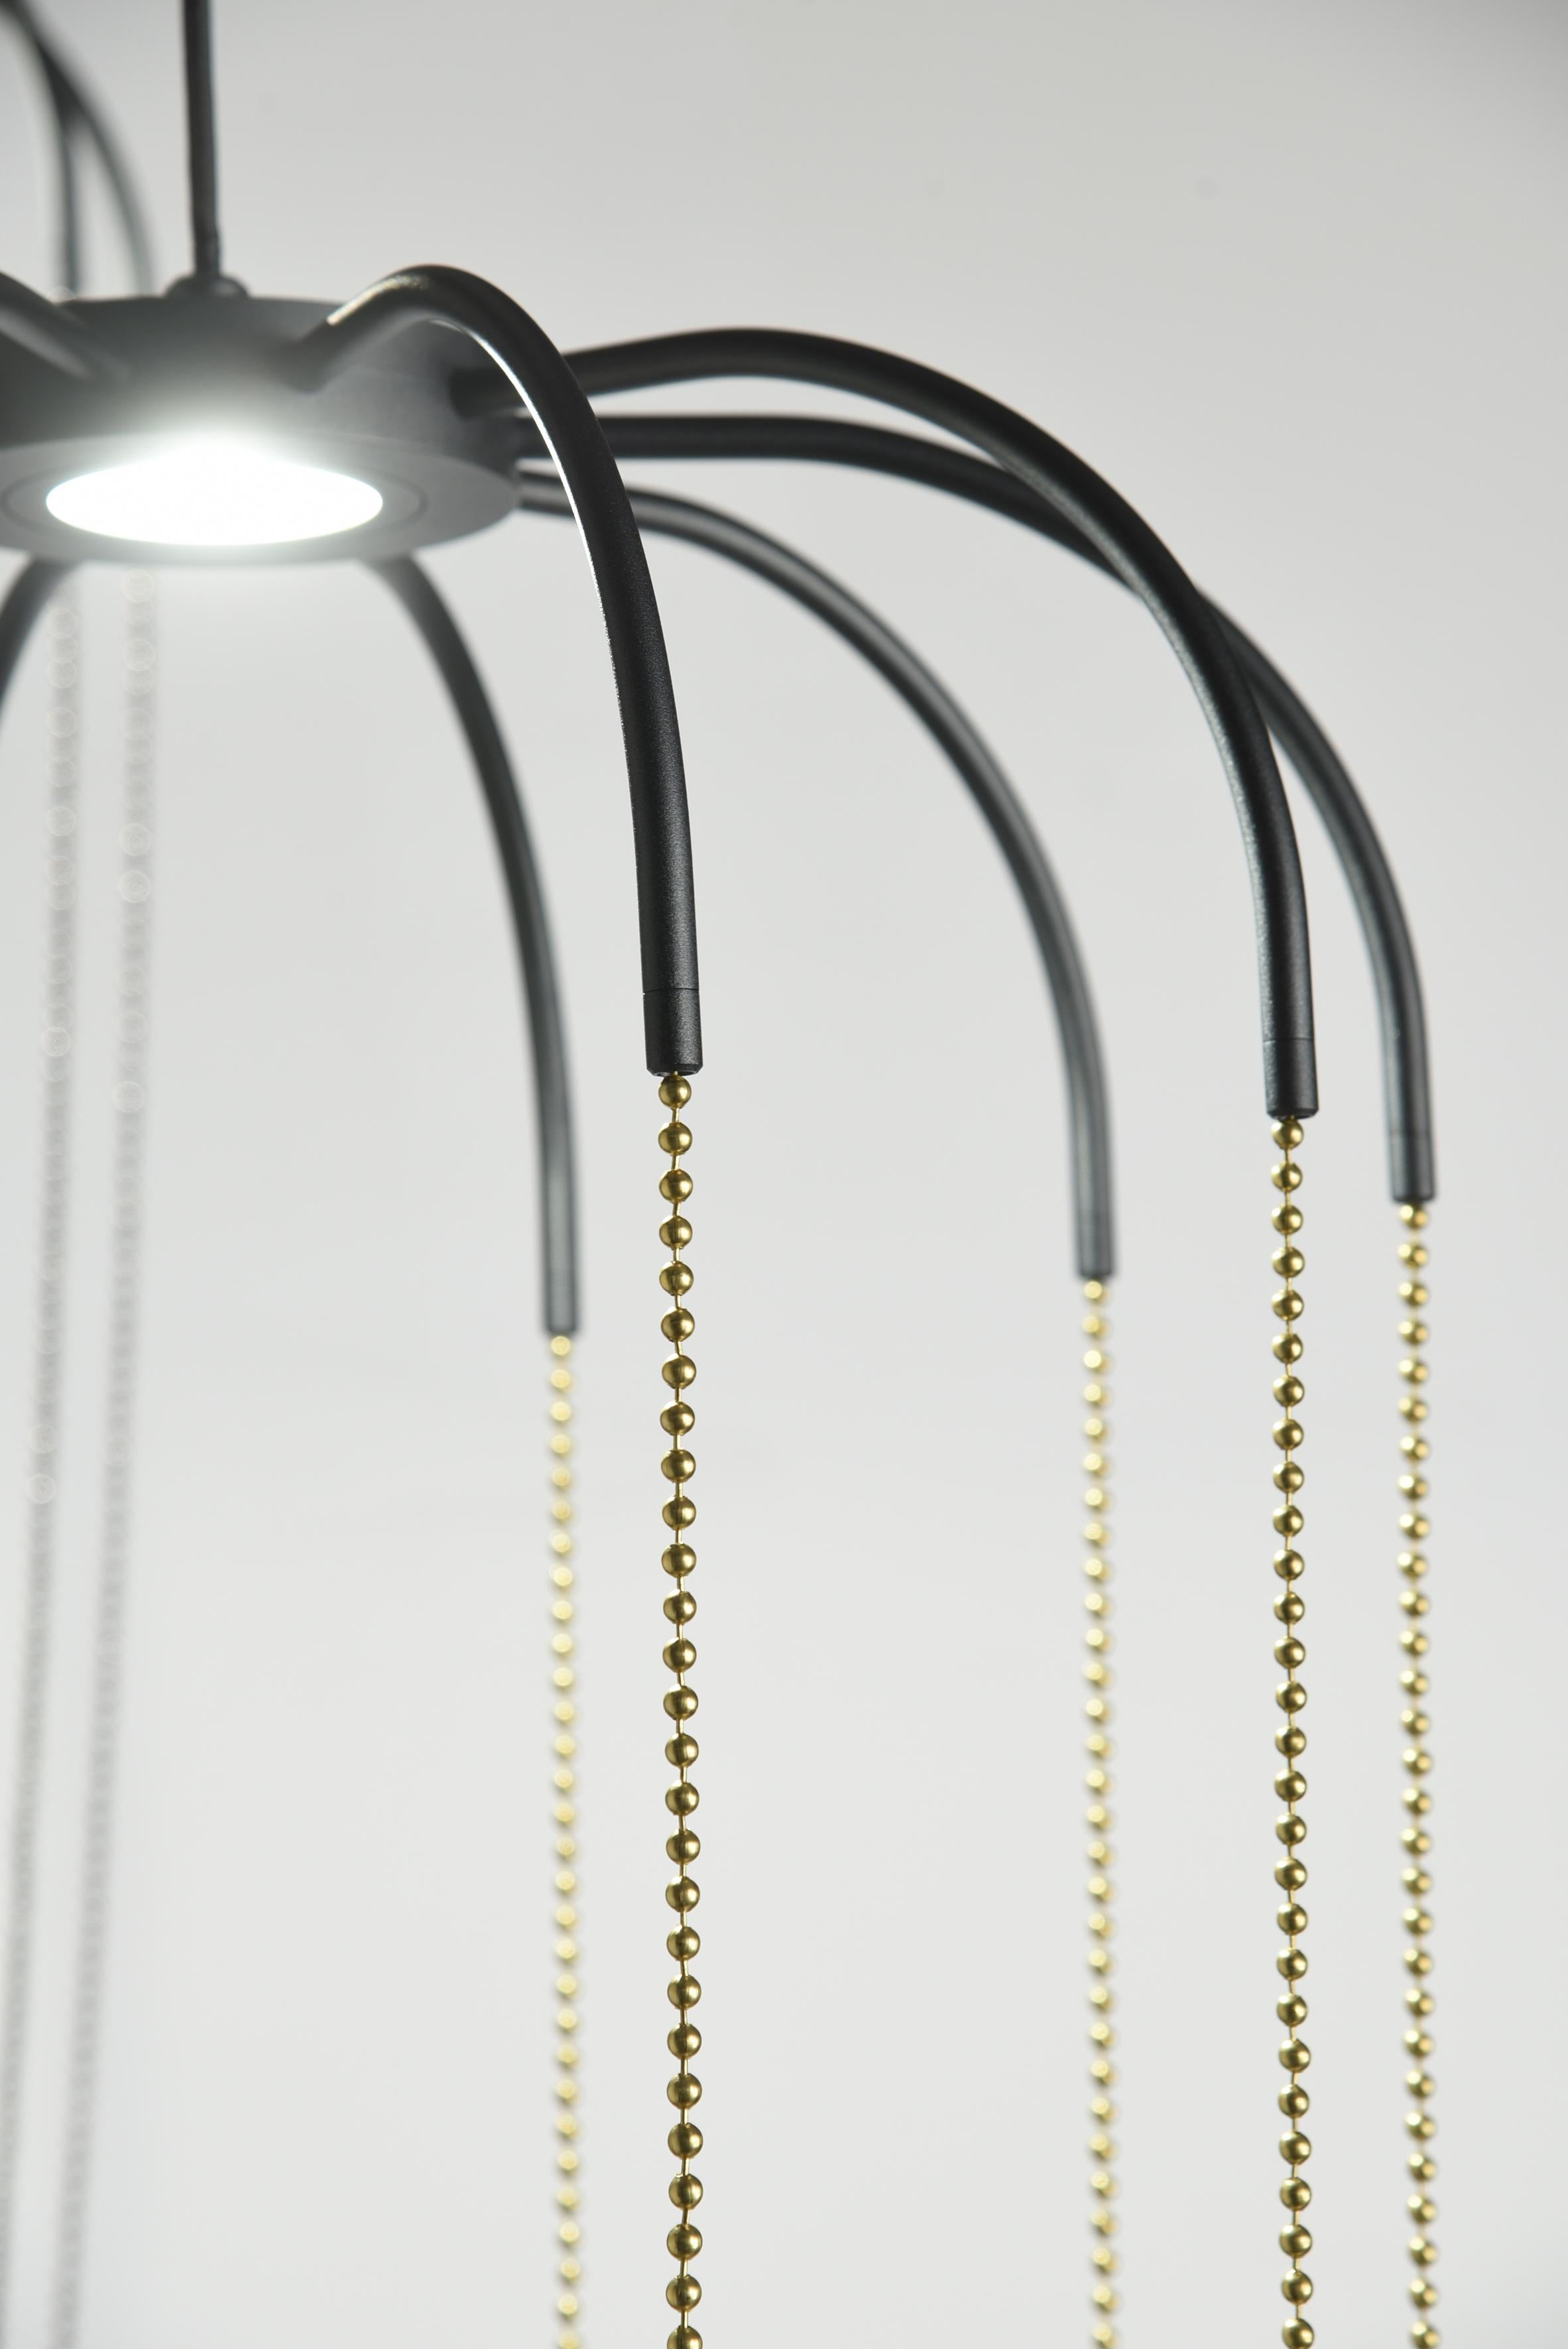 Contemporary Axolight Alysoid Medium Pendant Lamp in Anthracite Grey with Brass Chains For Sale